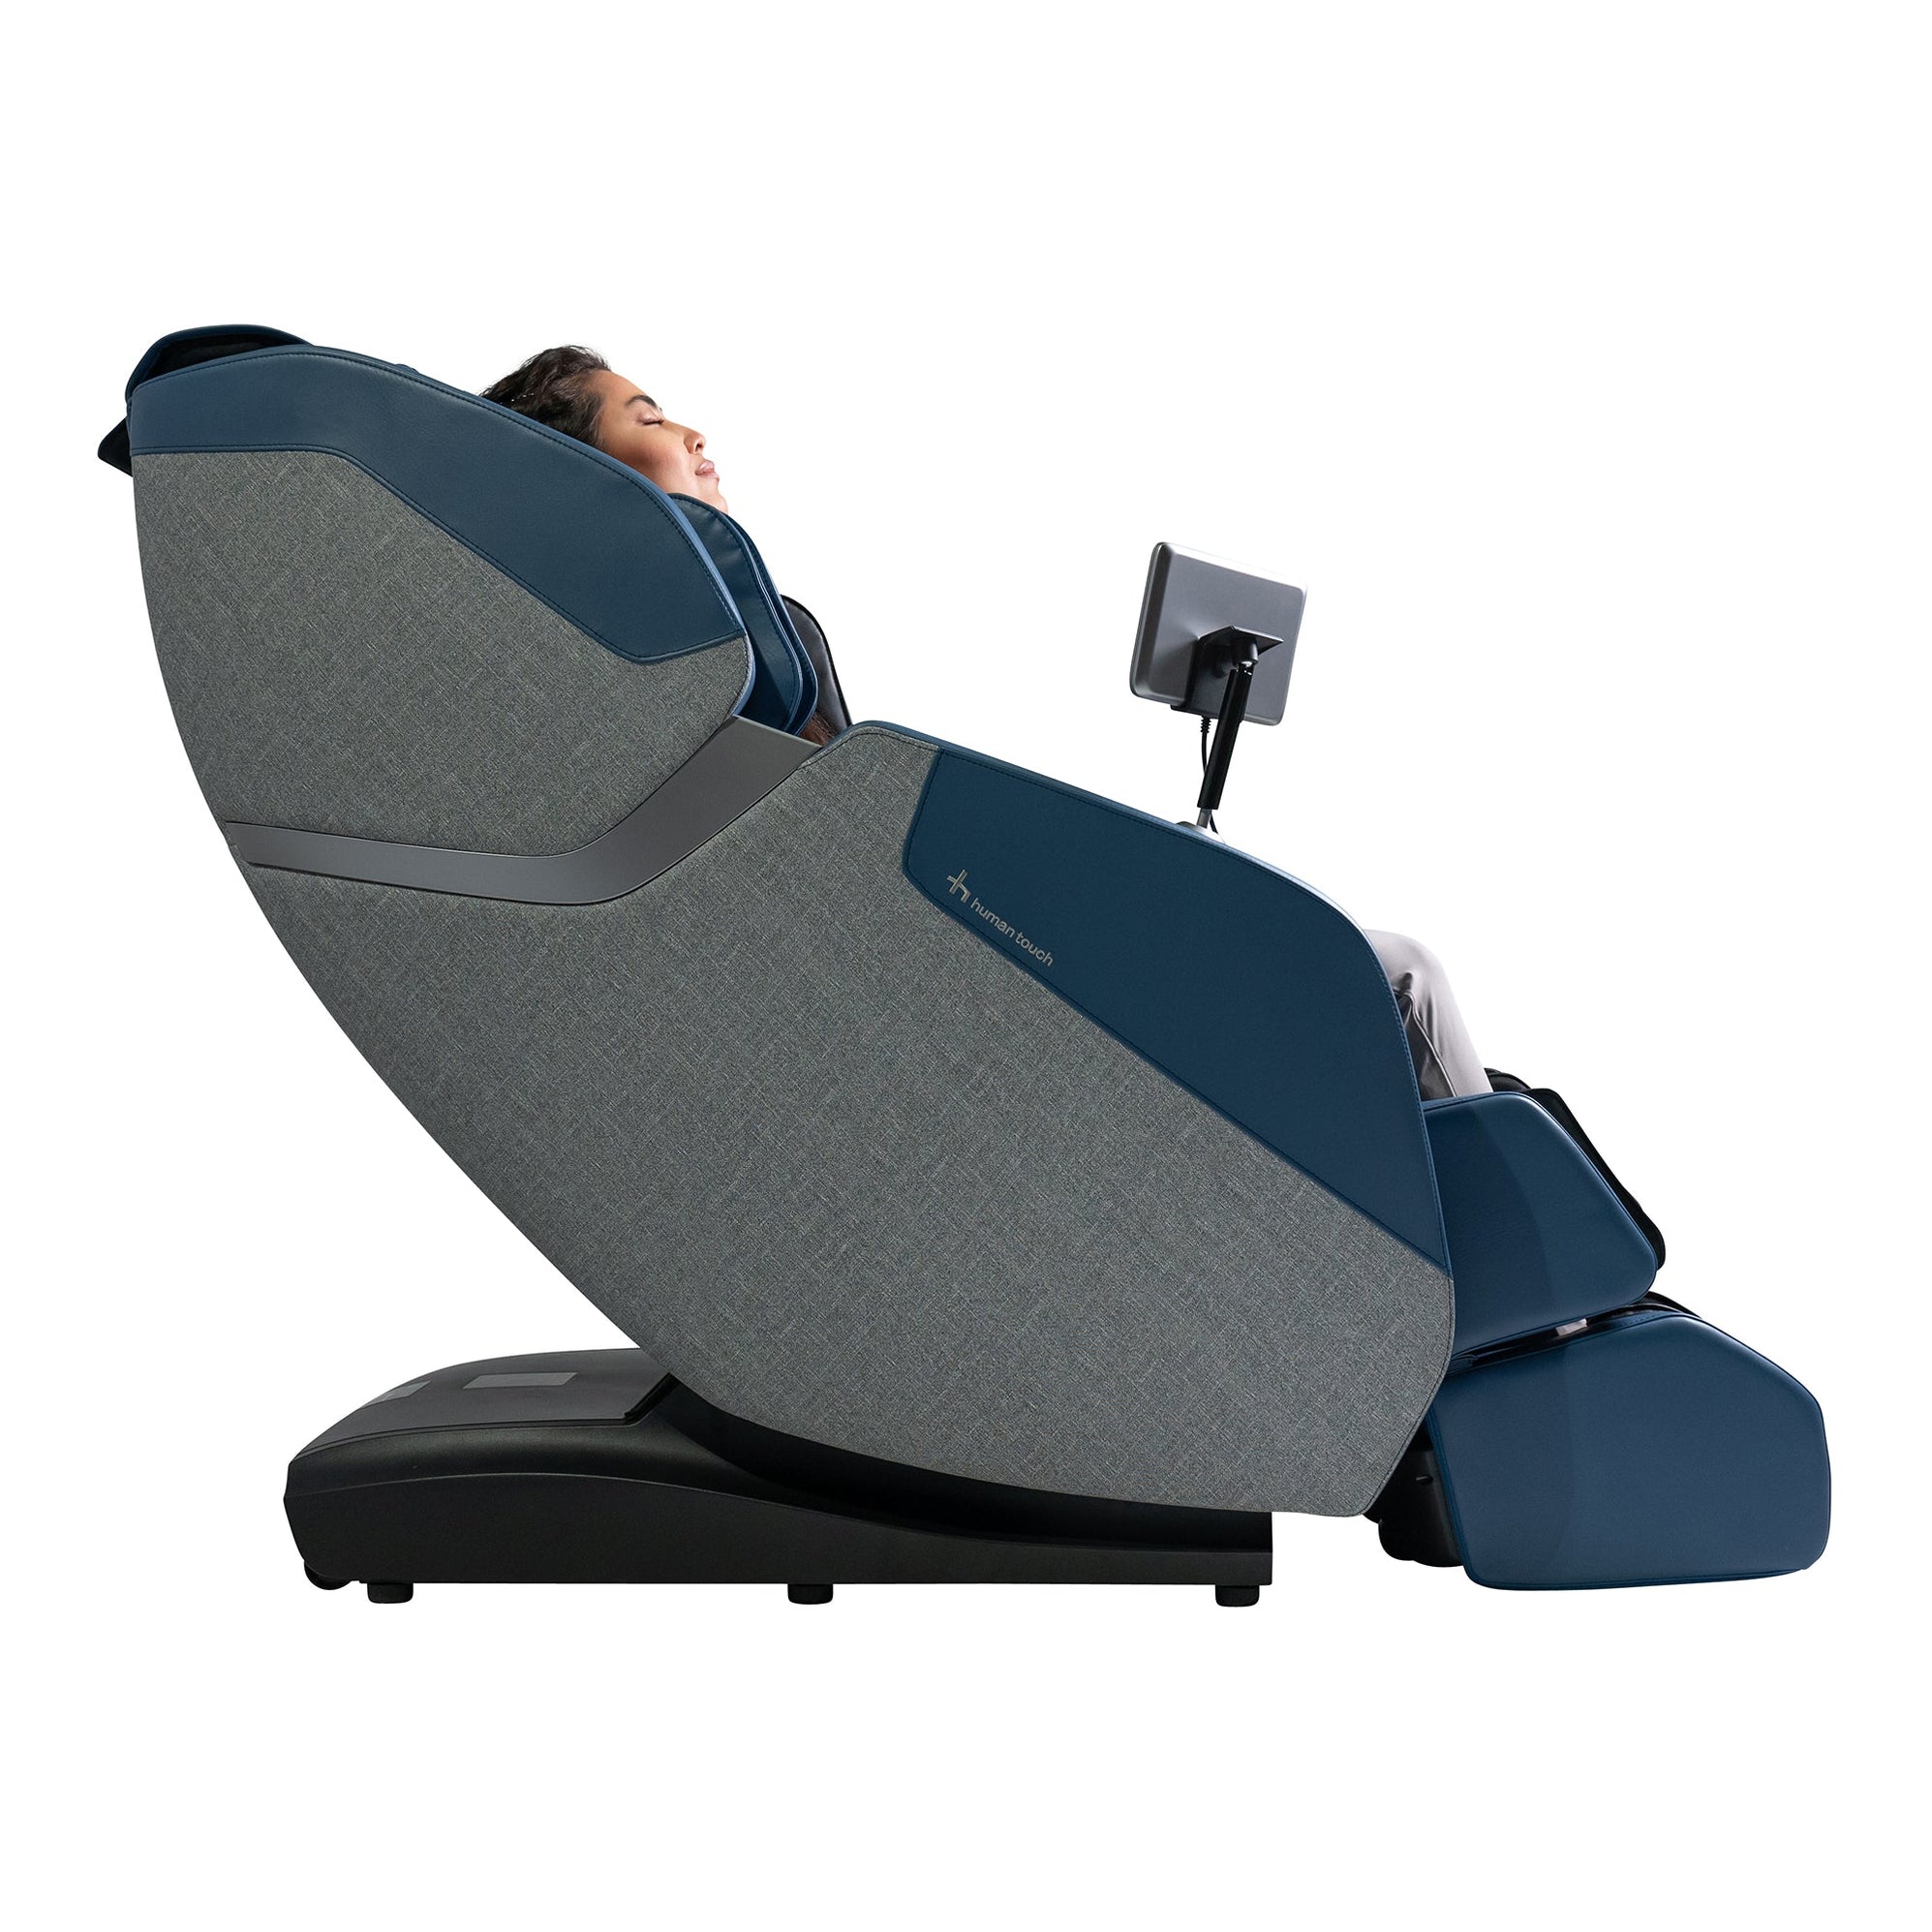 Wholebody Rove Massage Chair By Human Touch Relax The Back 8045